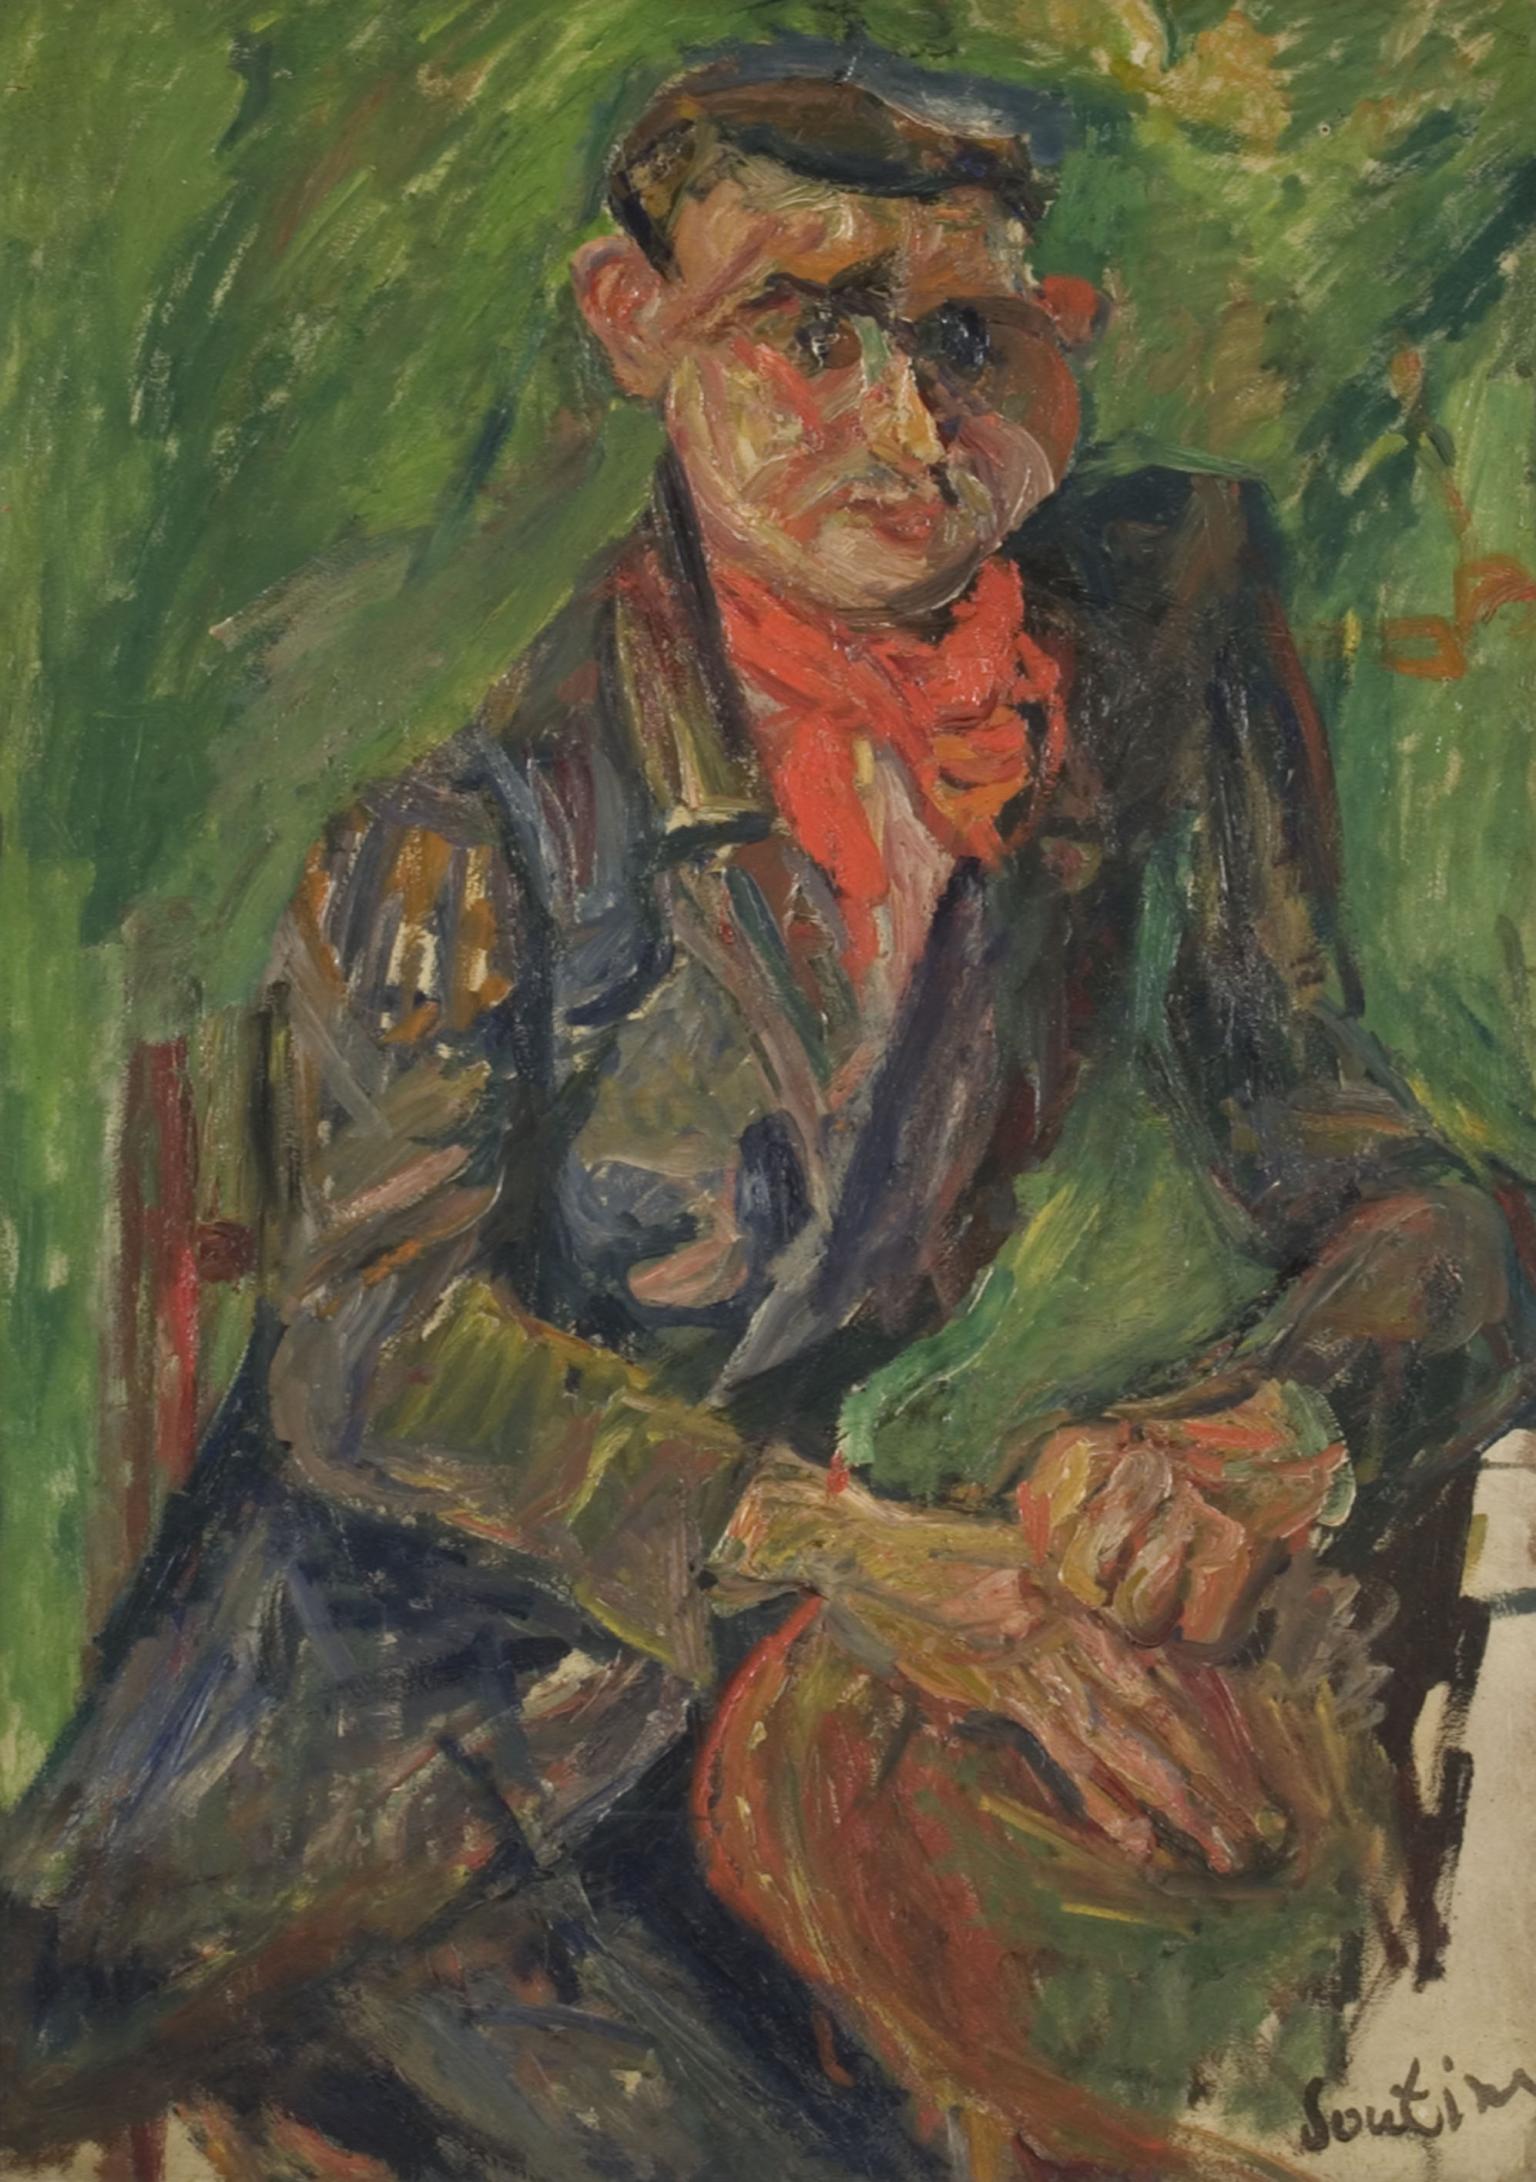 Painting of man sitting at table wearing suit and bandana around neck.